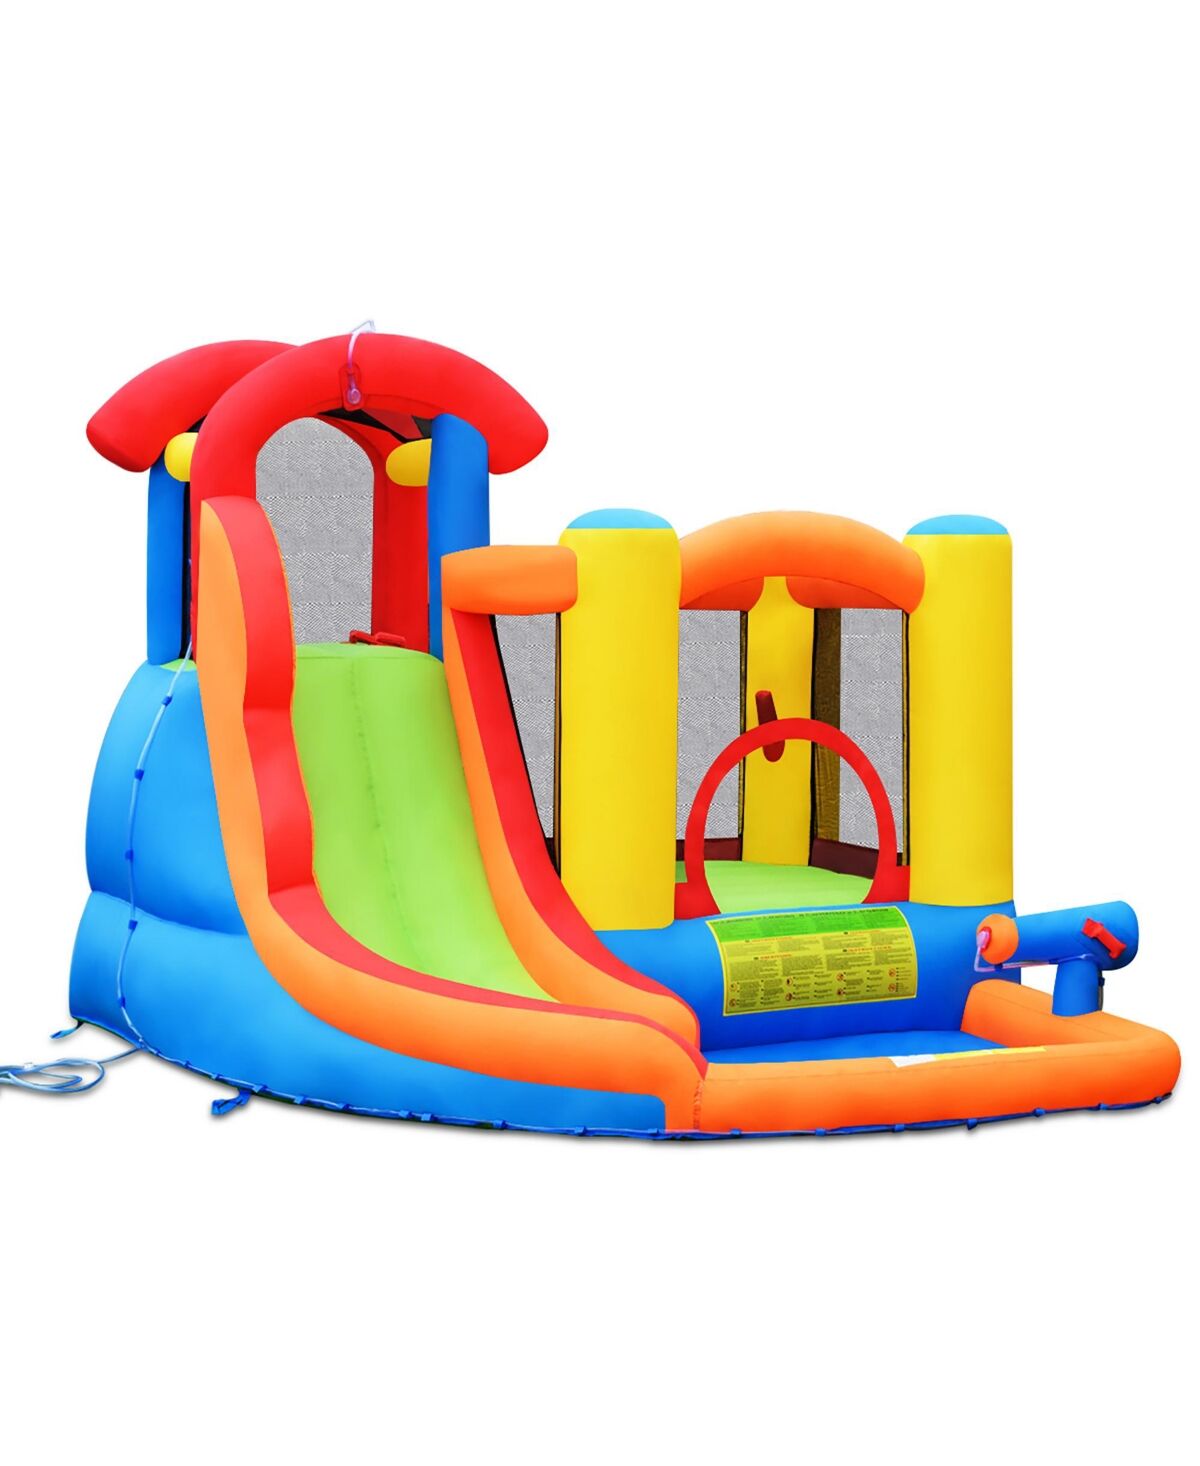 Costway Inflatable Bounce House Water Slide w/ Climbing Wall Splash Pool Water Cannon - Yellow